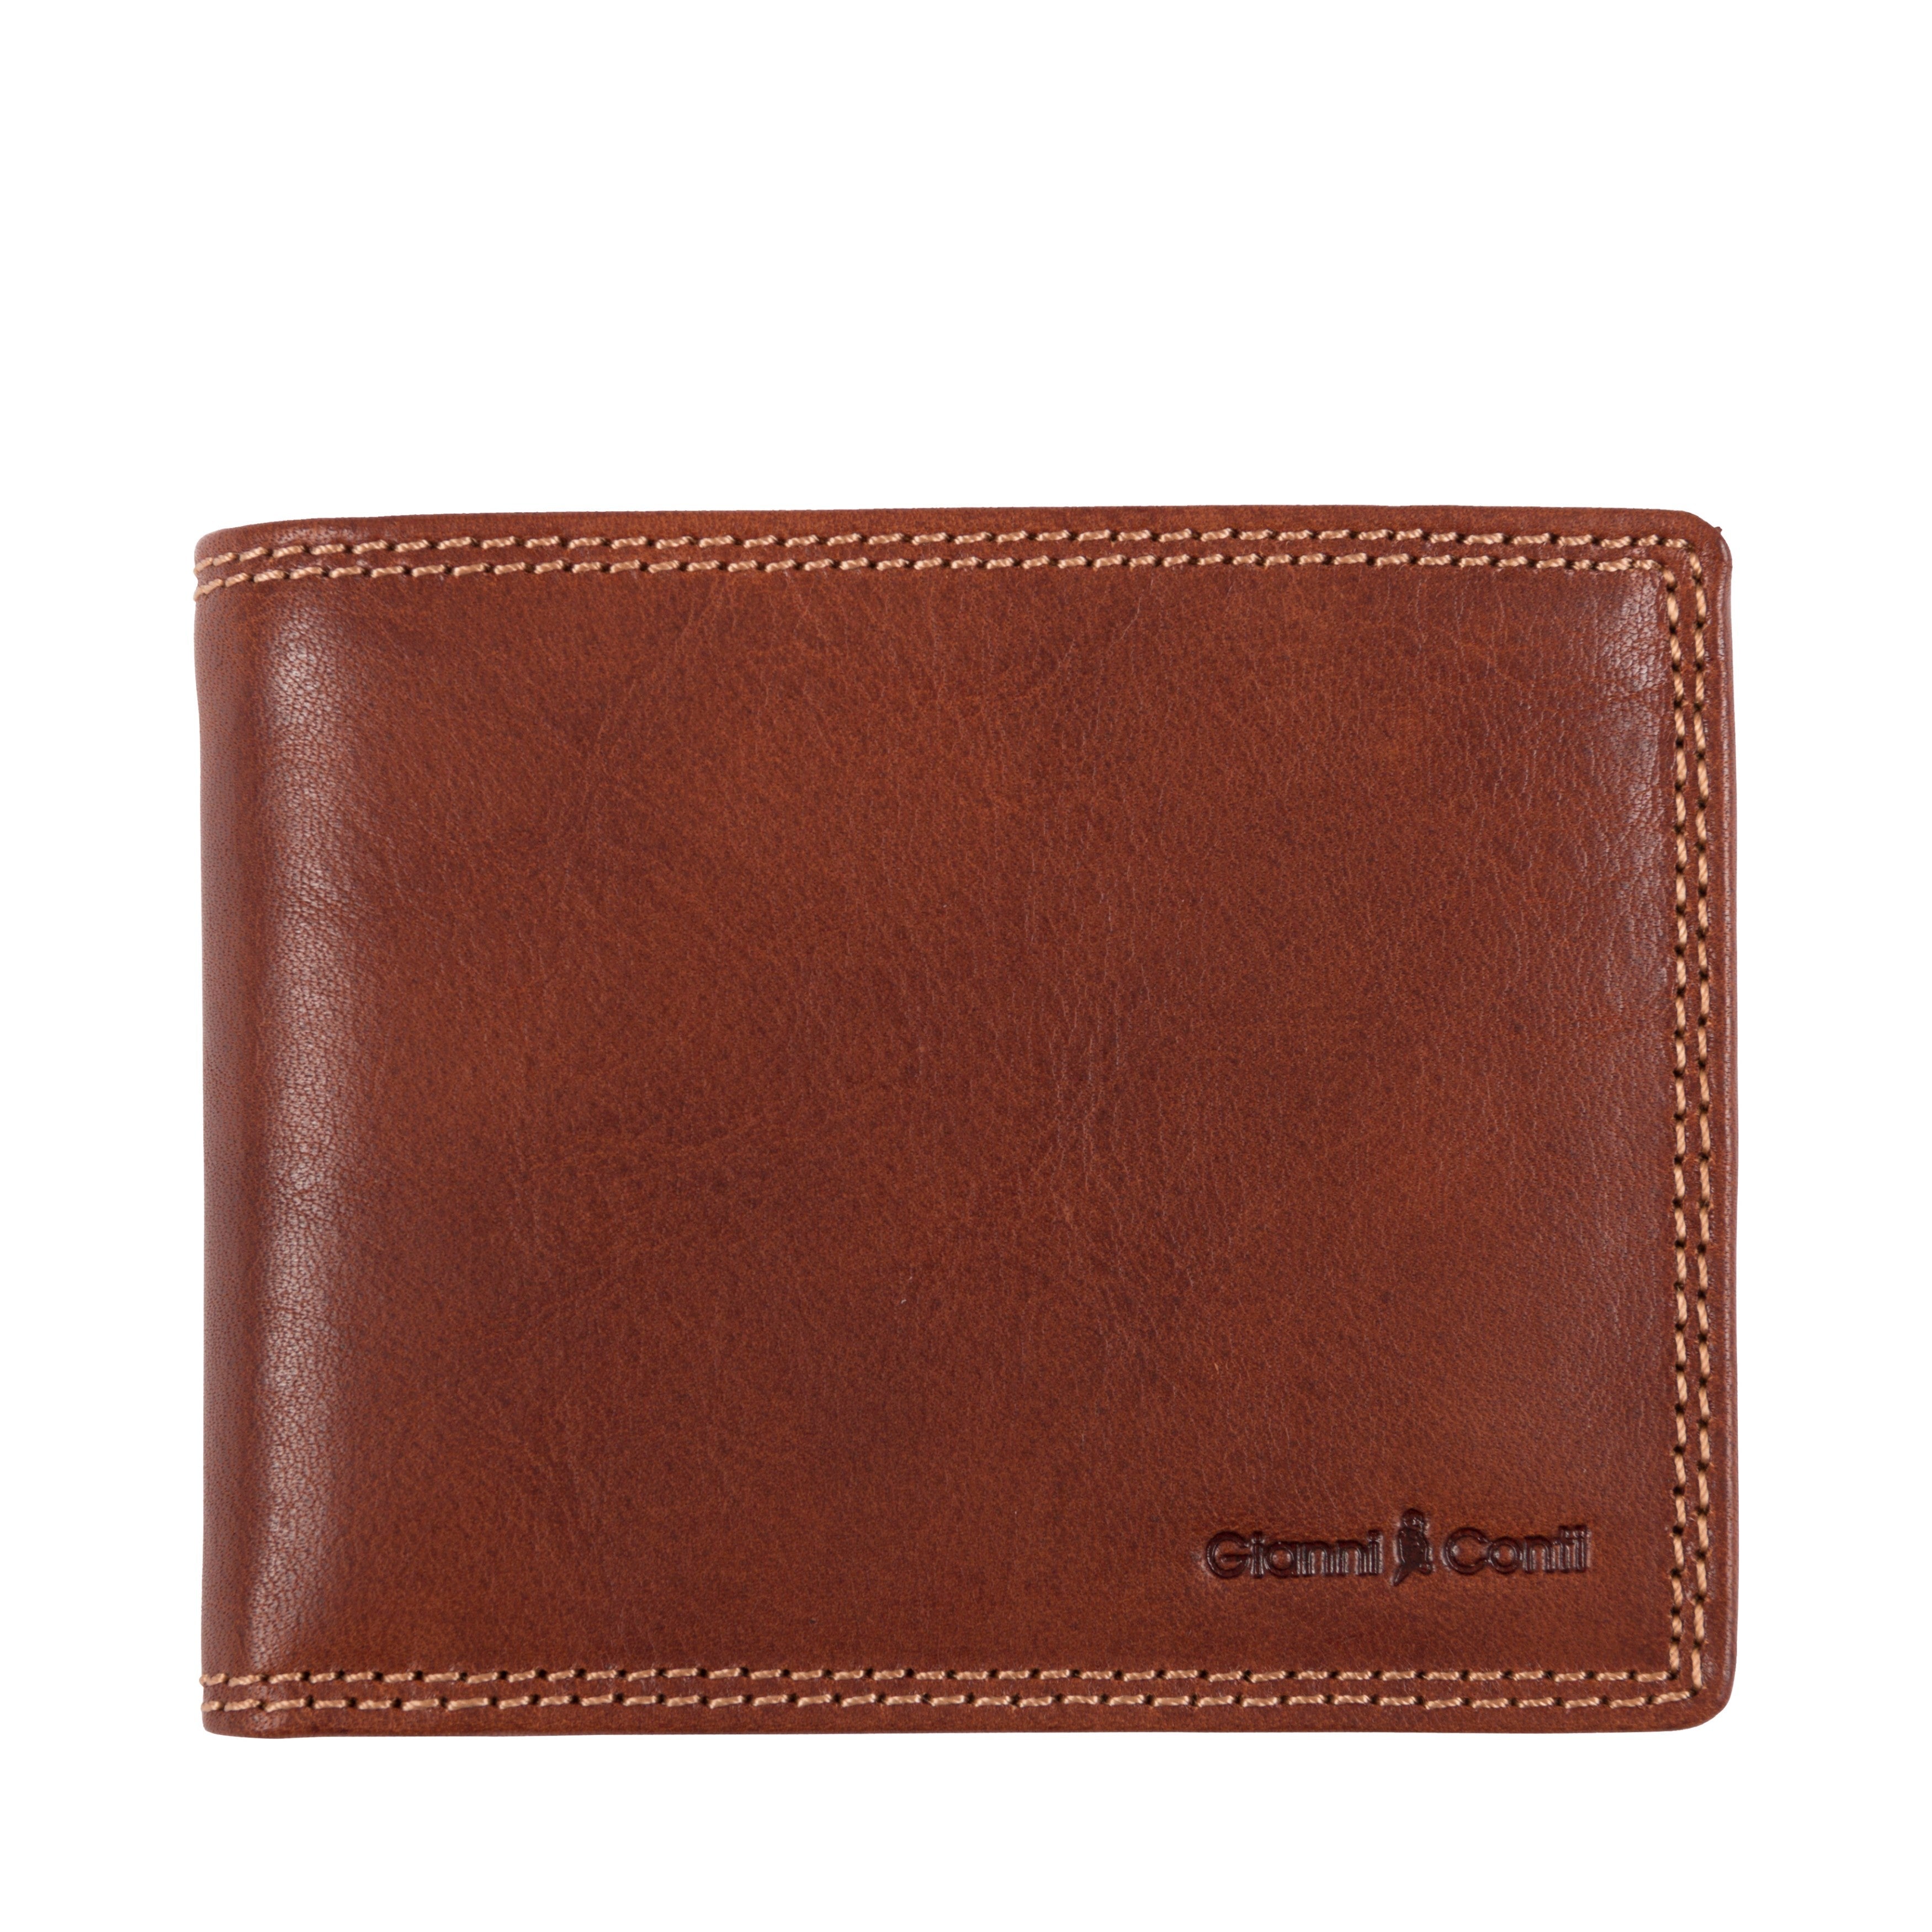 Gianni Conti FINN Vegetable-Tanned Leather Wallet